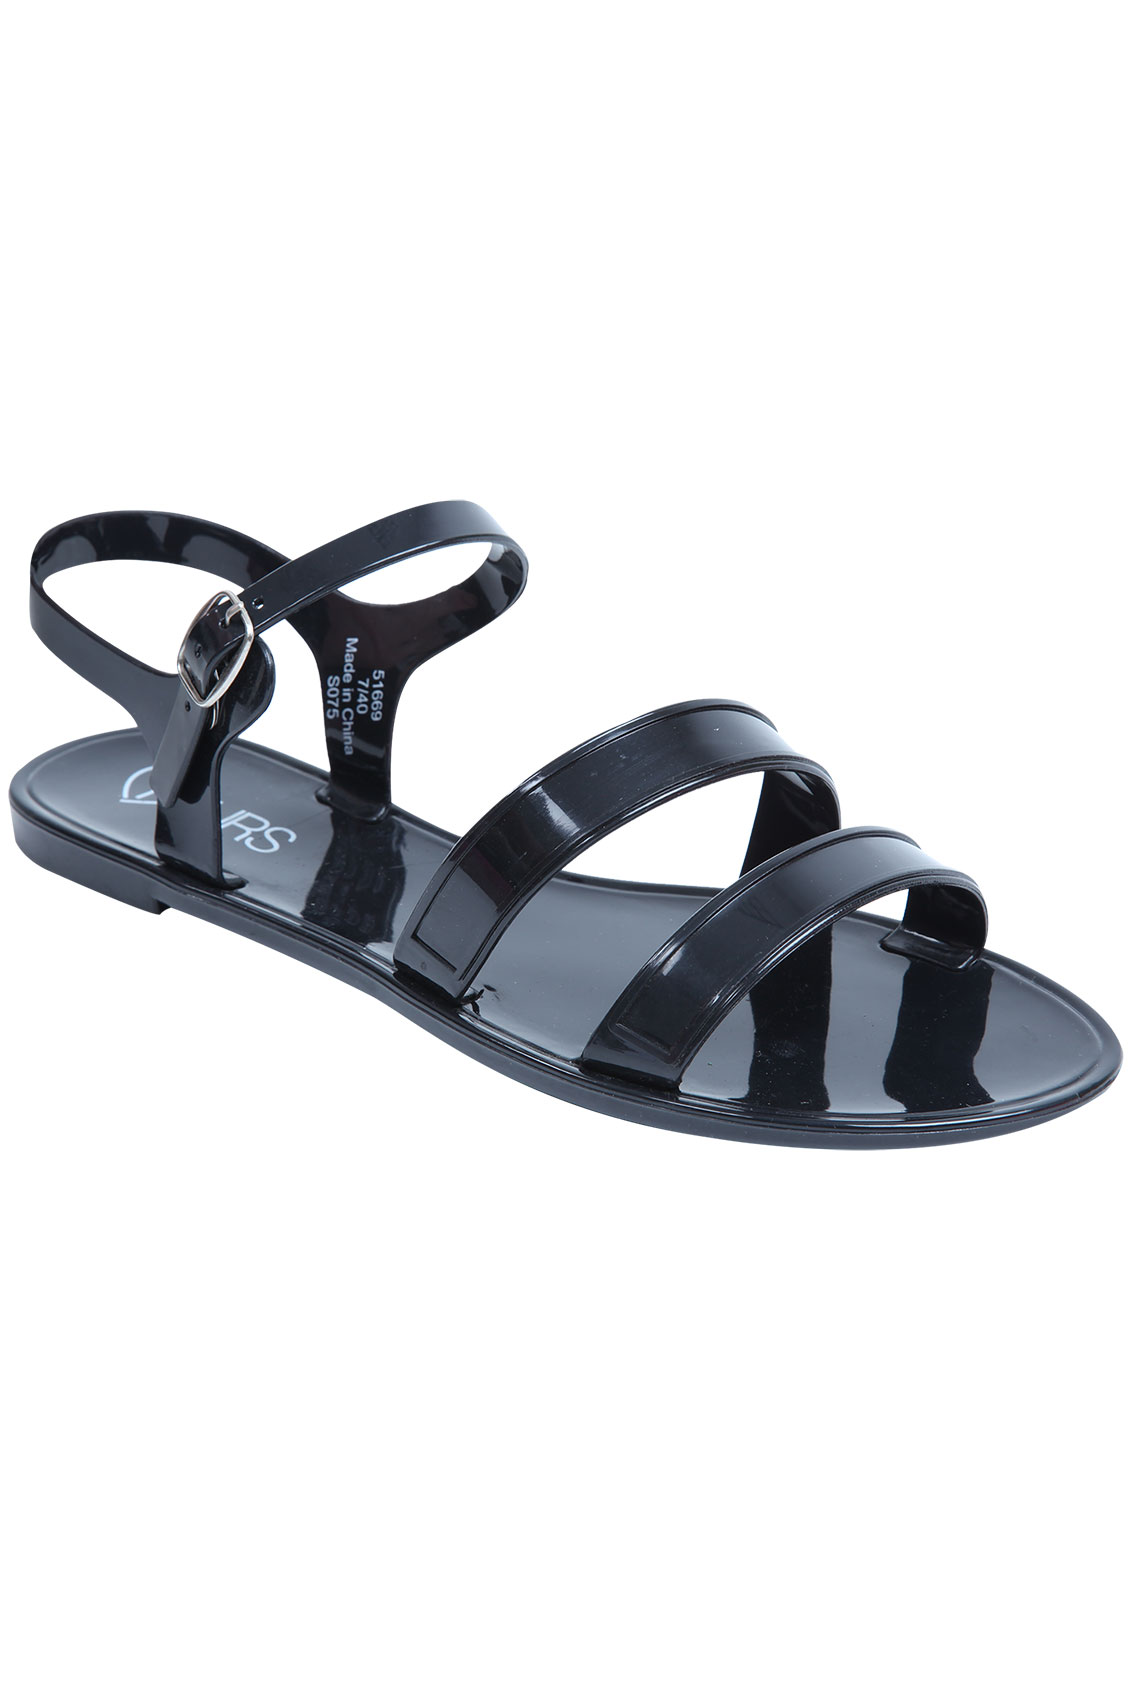 Black Two Strap Jelly Sandals In EEE Fit sizes 4,5,6,7,8,9,10 | Yours ...